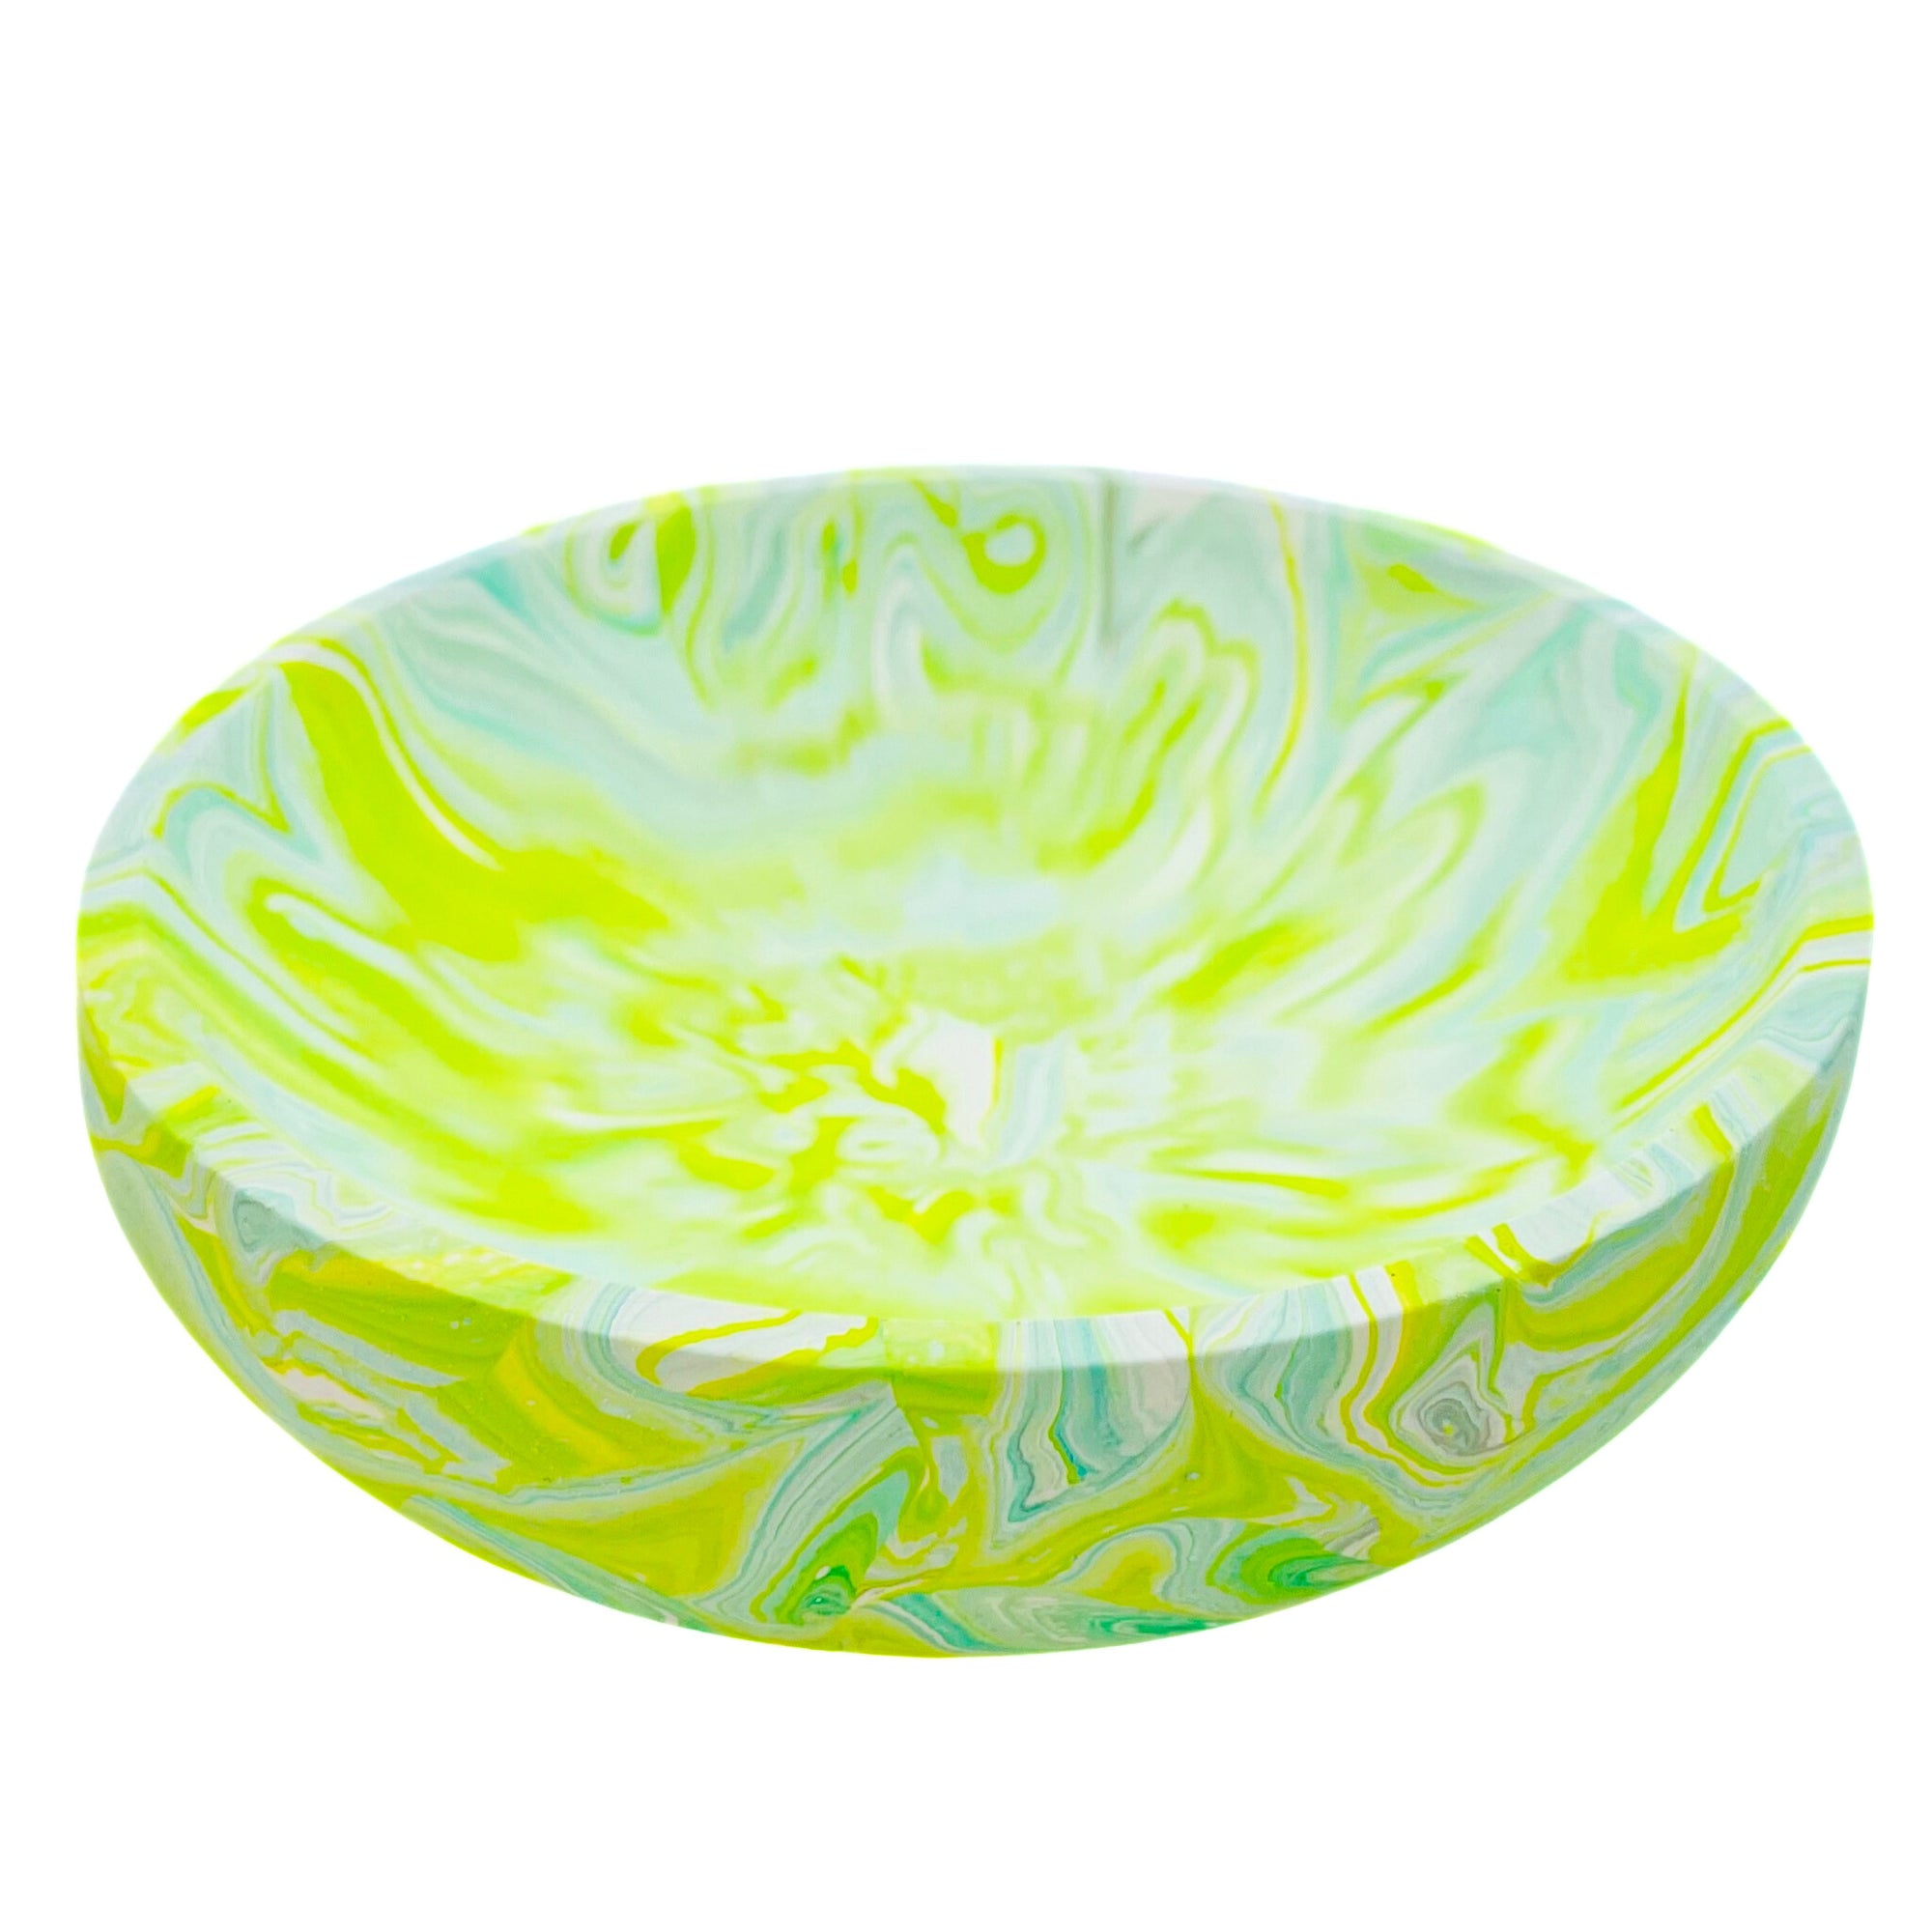 A shallow medium size Jesmonite bowl marbled with turquoise and lime pigment.